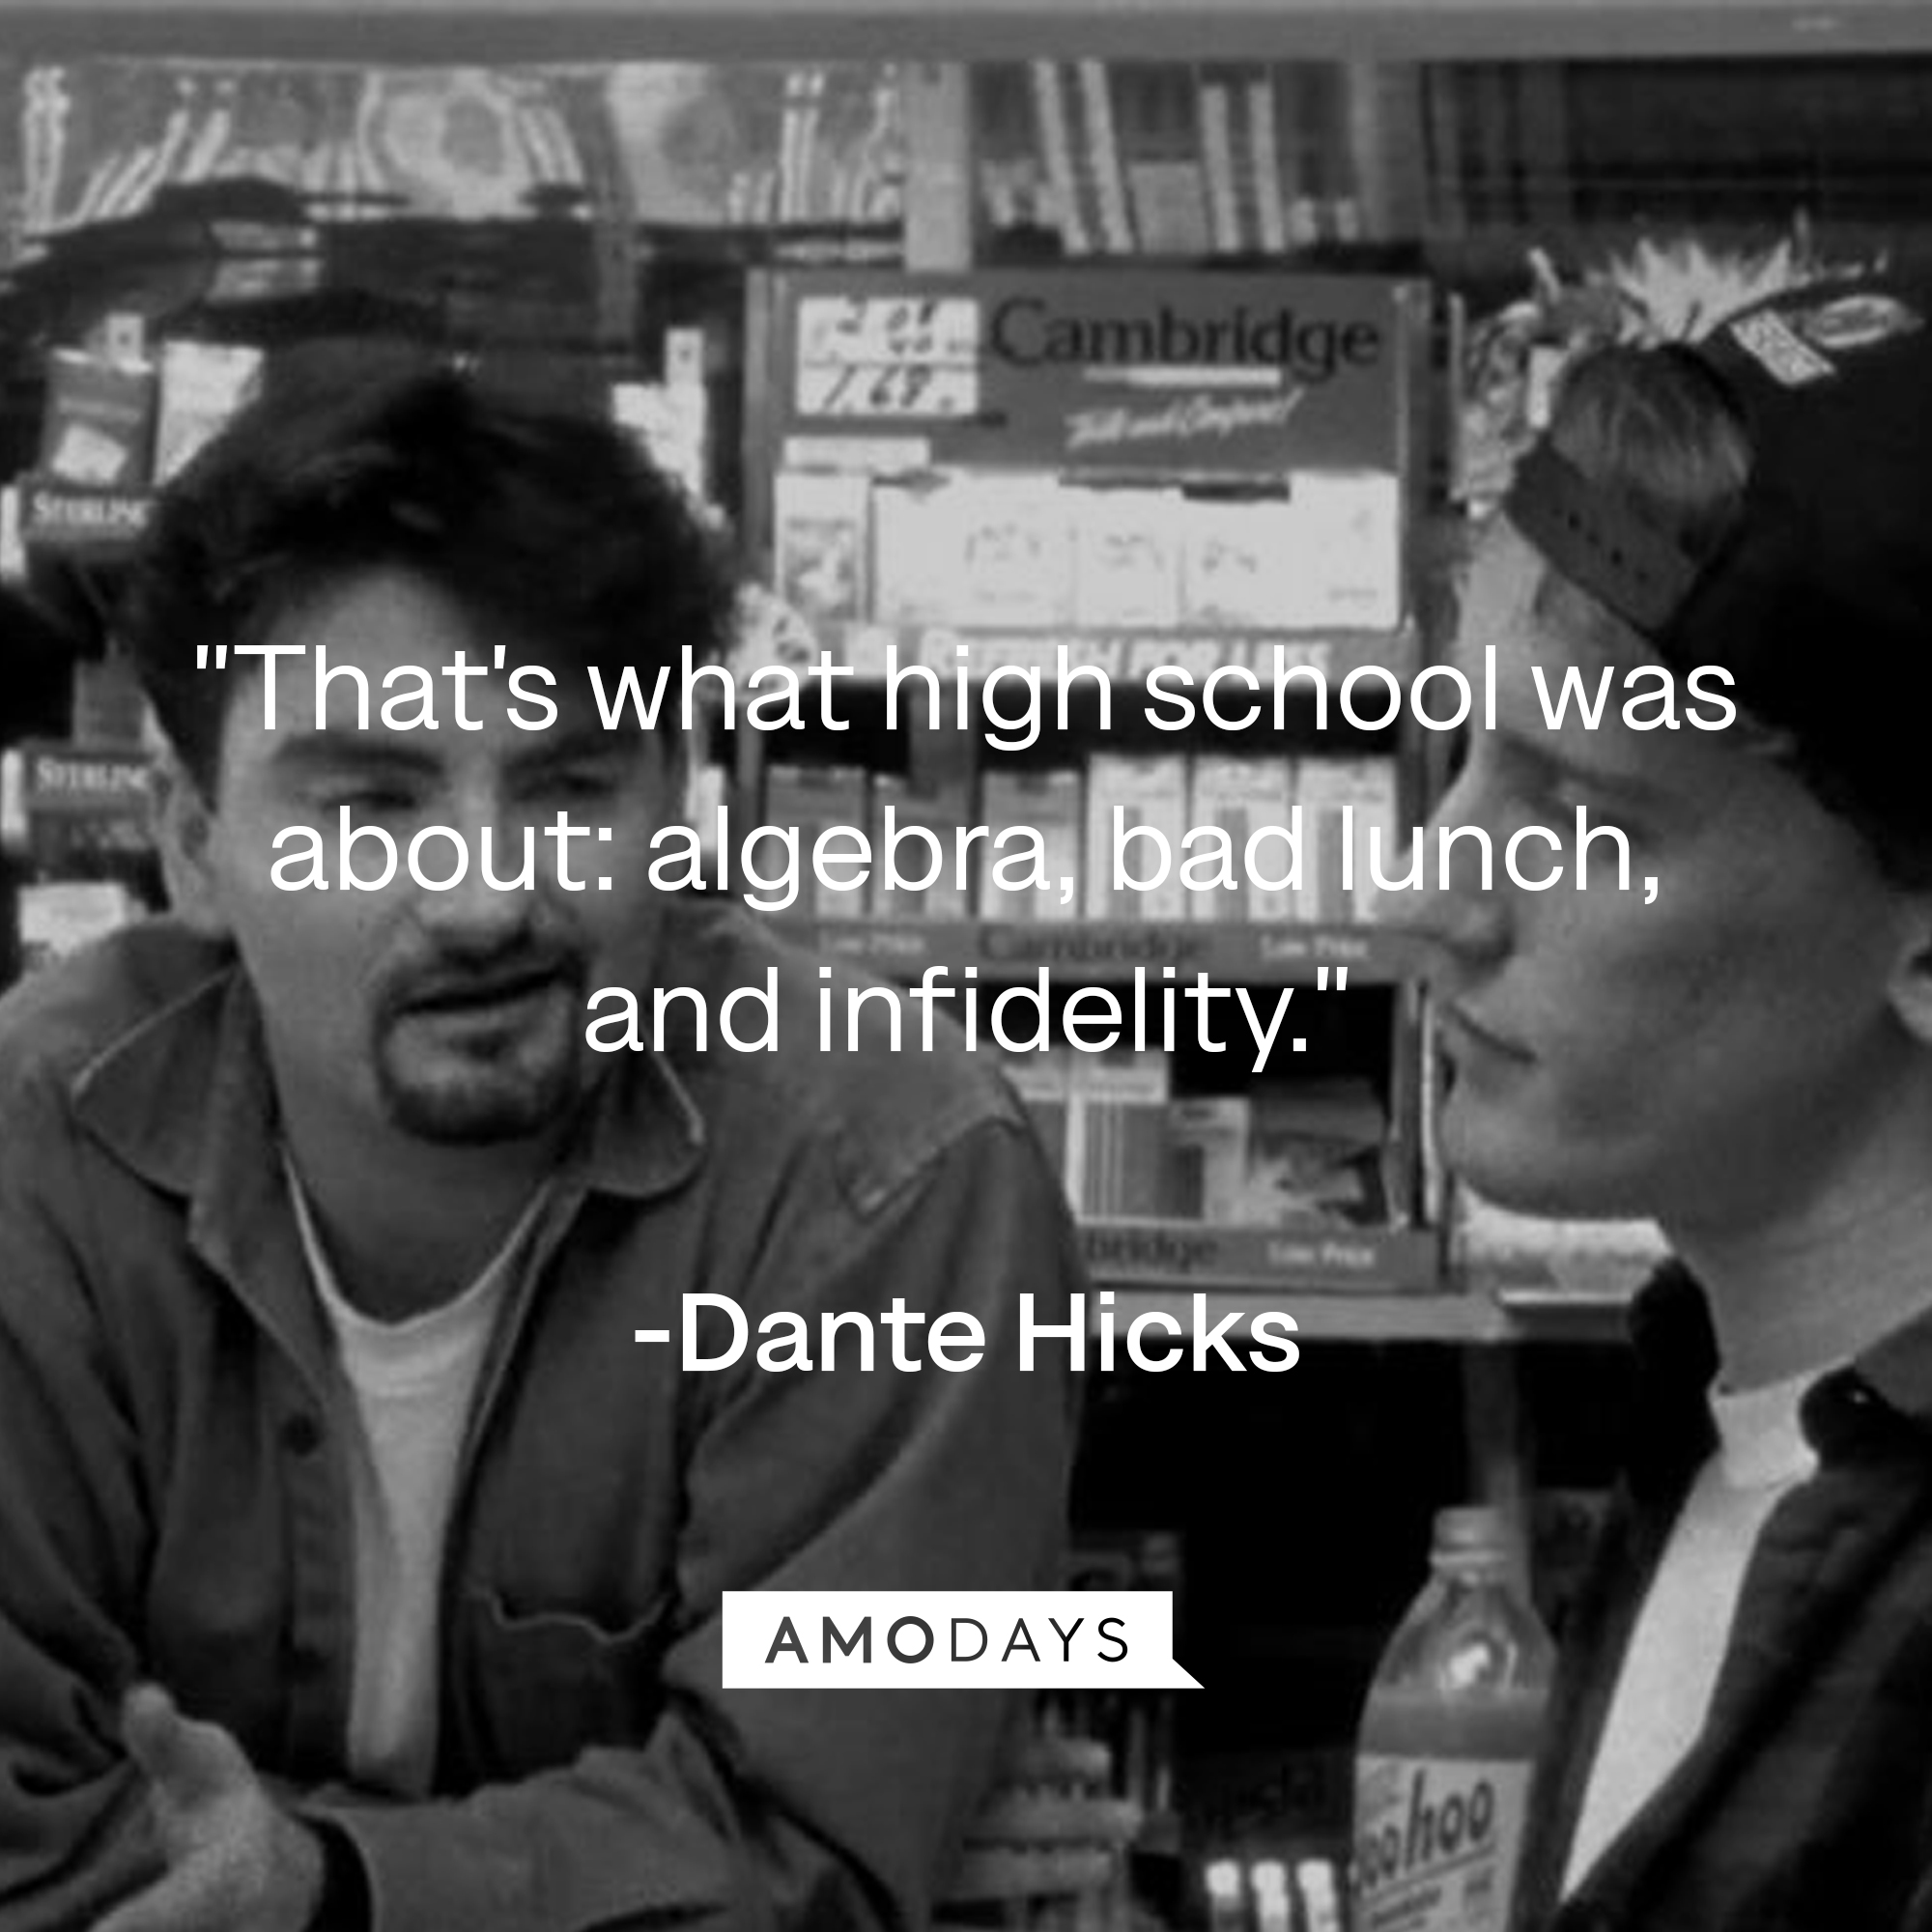 Dante Hicks' quote, "That's what high school was about: algebra, bad lunch, and infidelity."  | Source: Facebook/ClerksMovie